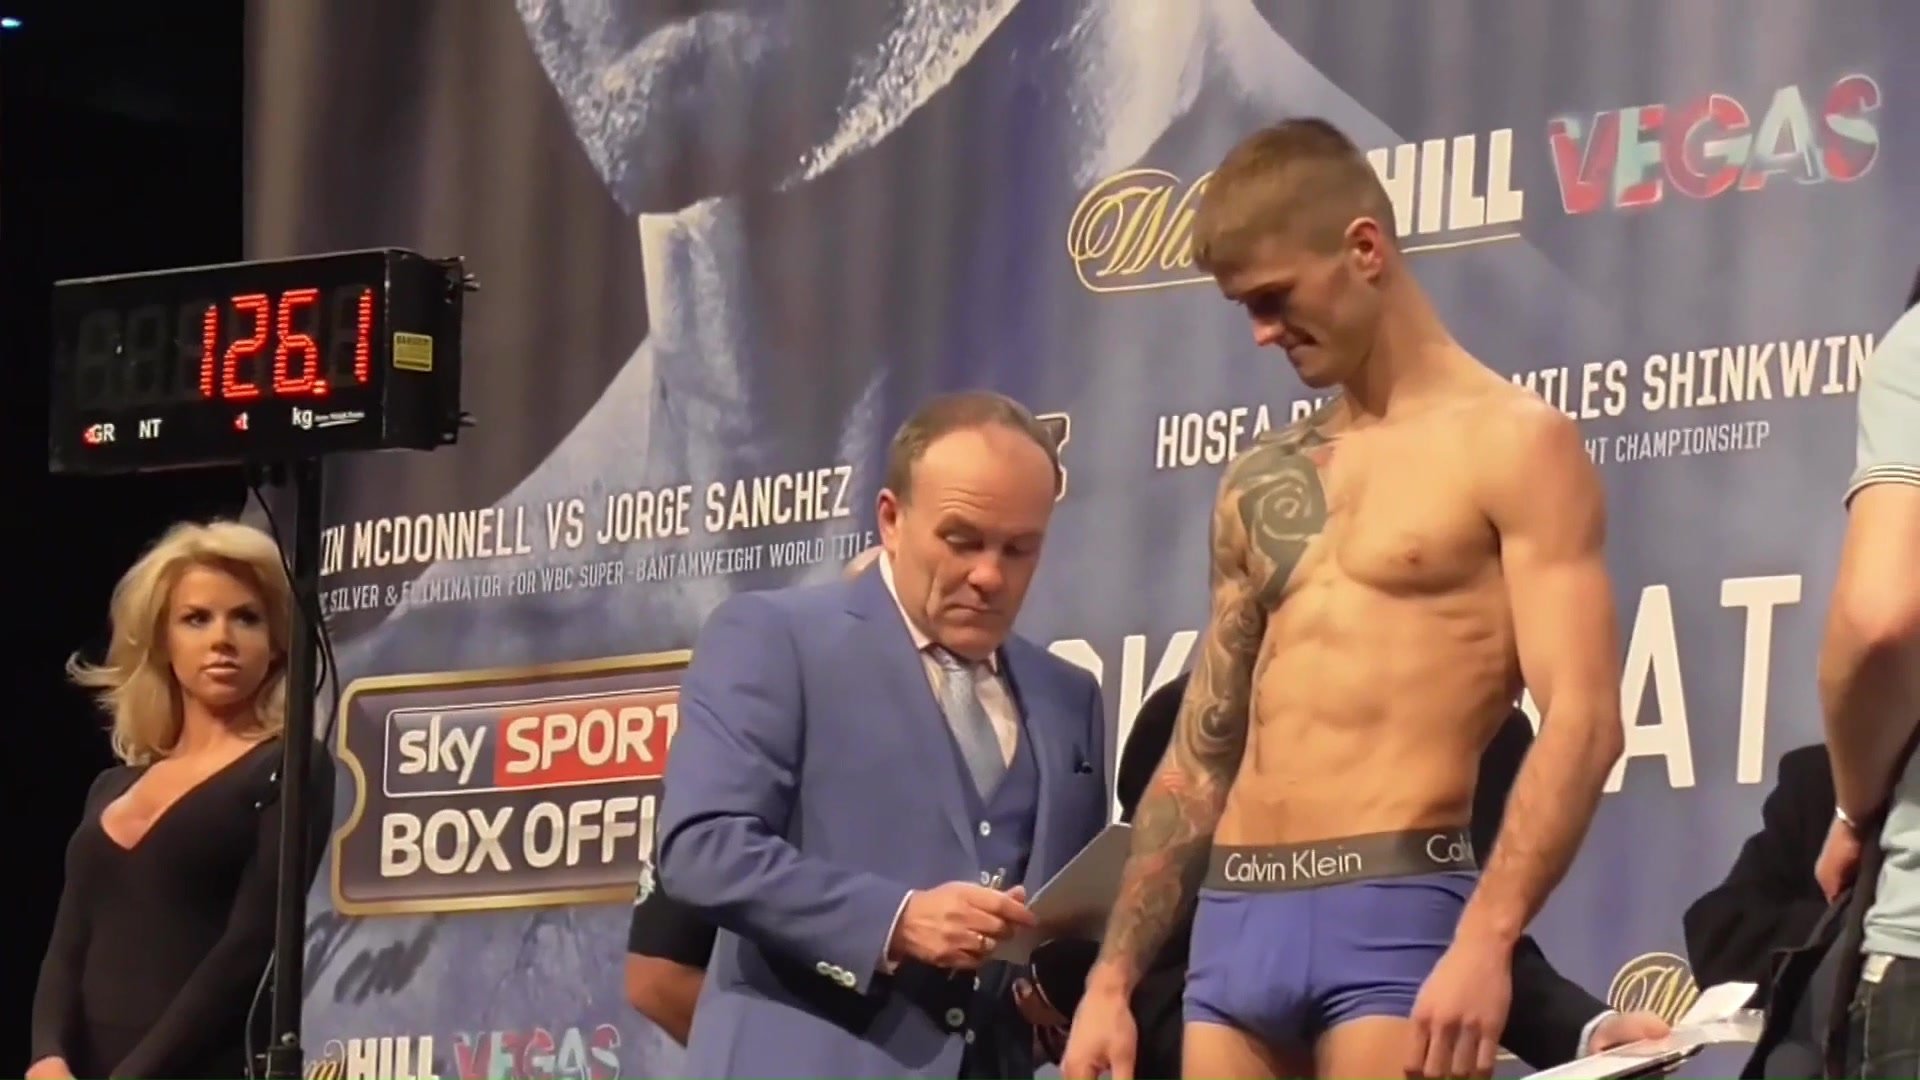 Cock flash at the weigh in